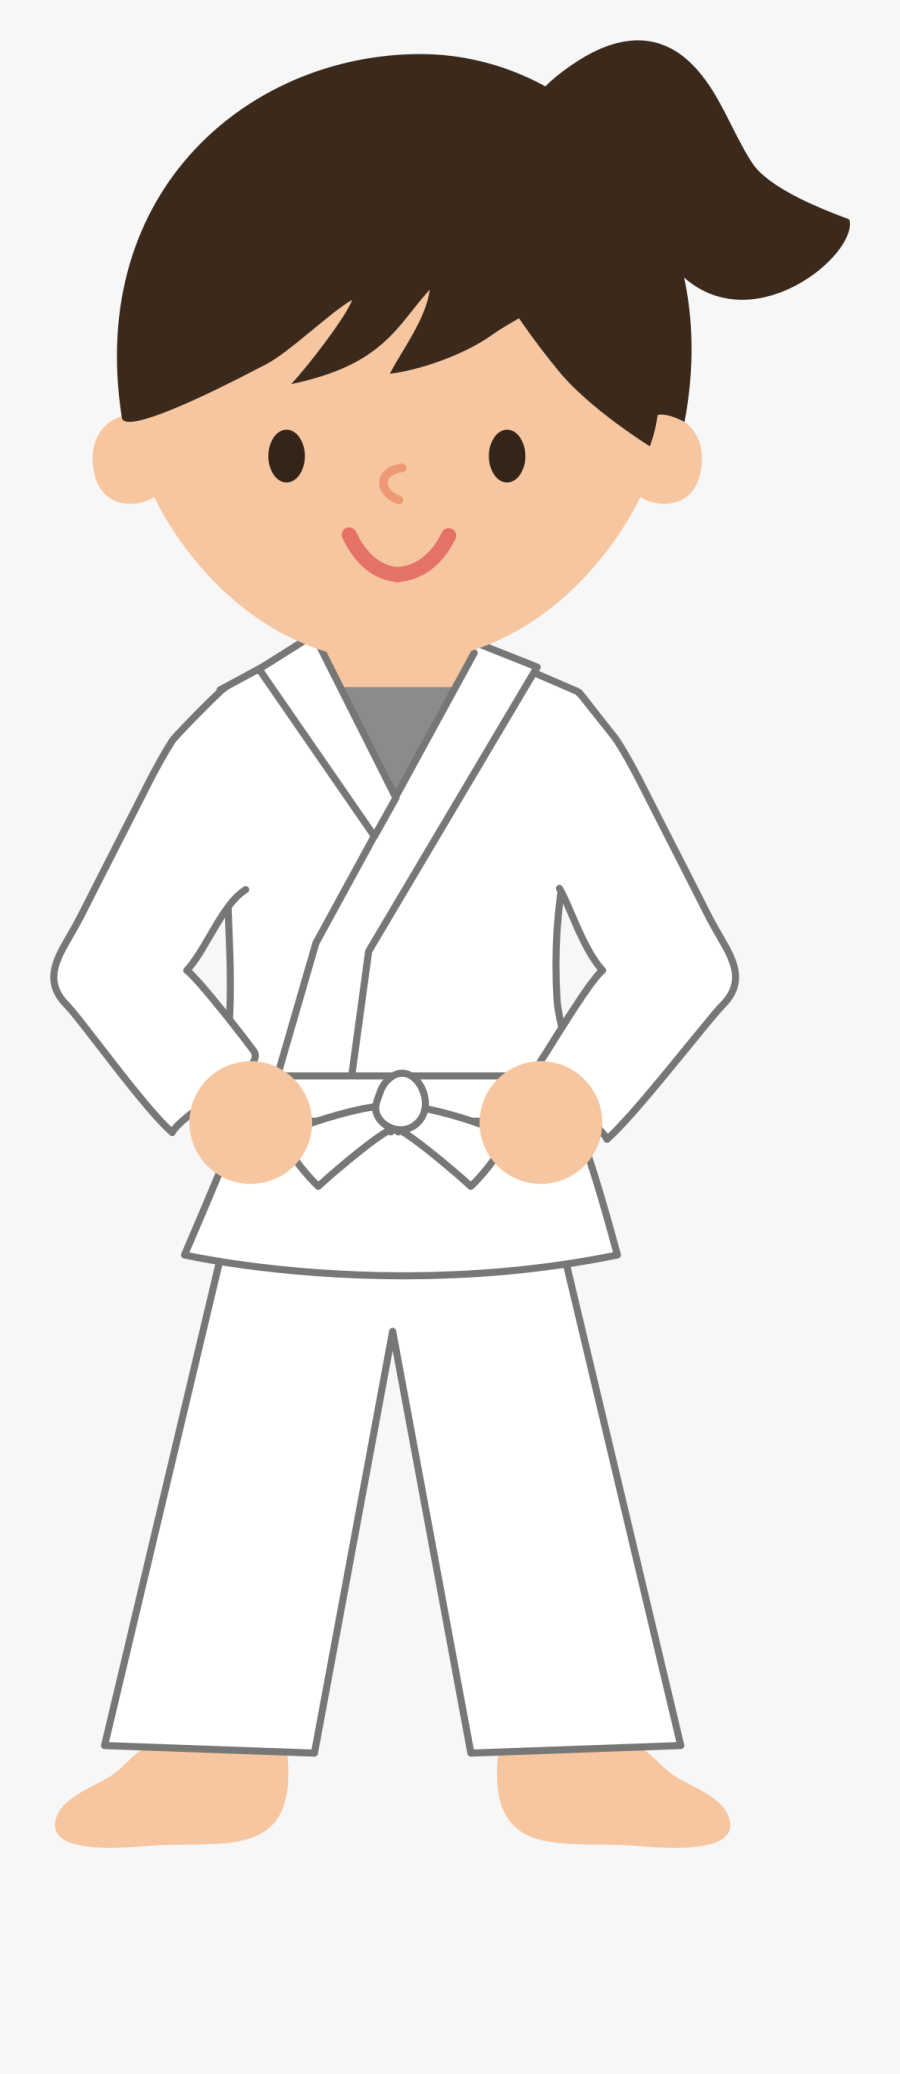 Karate Clipart Stage Fighting - Female Karate Clip Art, Transparent Clipart